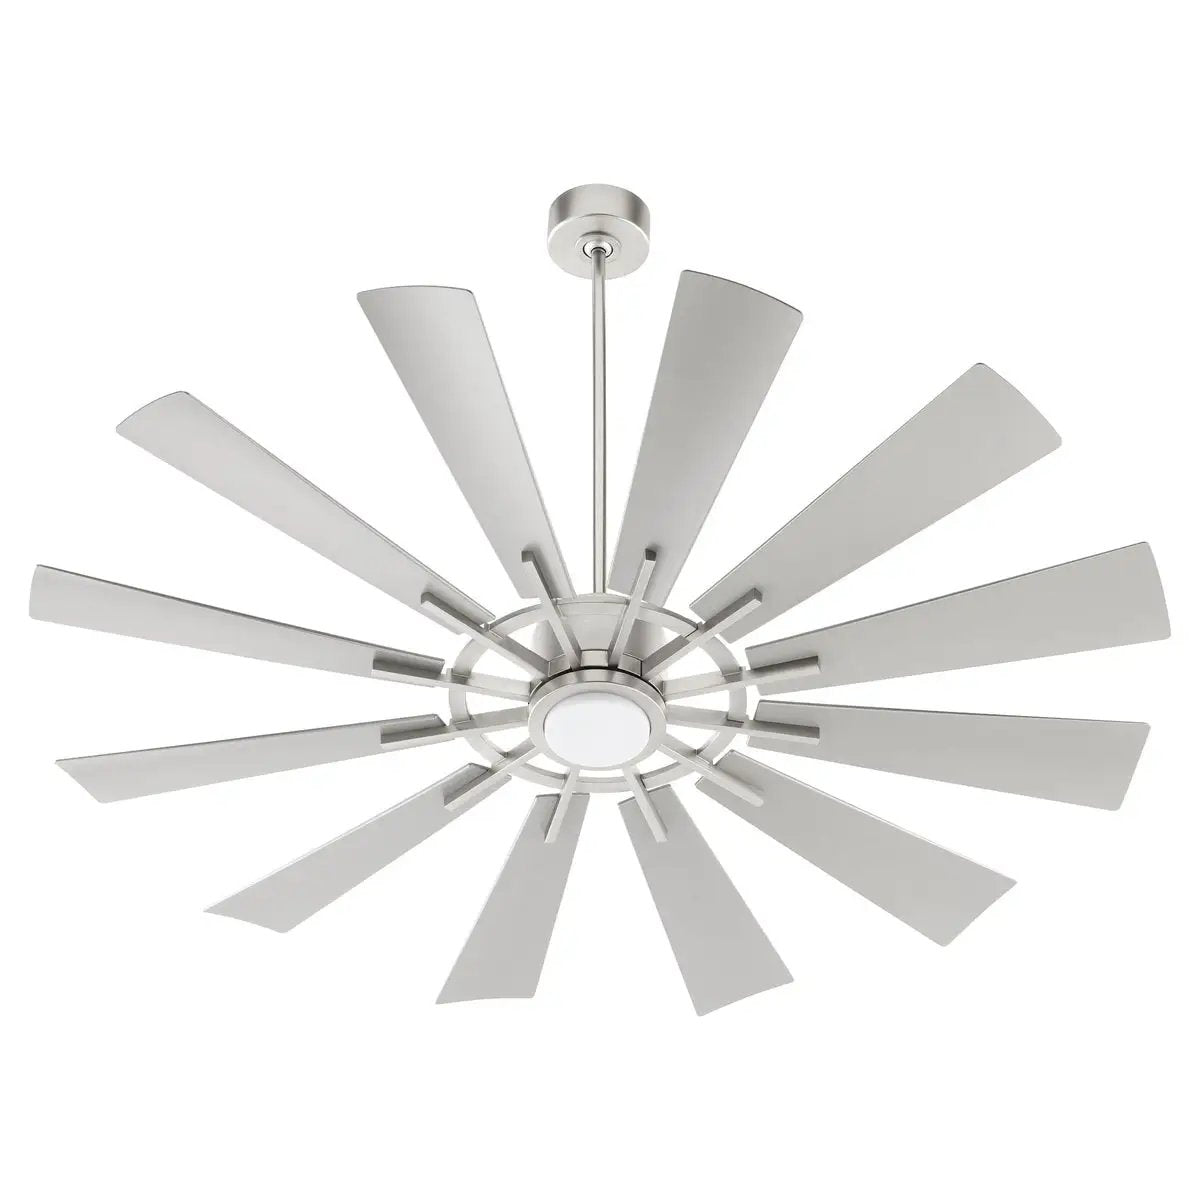 Outdoor Ceiling Fan with Light, a high-performance fan with wood stained blades, dark chromatic housing motor, and iron elements. 6-speed options for indoor or outdoor use. 12 blades, 60" span, 14-degree pitch. LED light kit included. UL Listed, Damp Location safety rating. Limited Lifetime warranty.